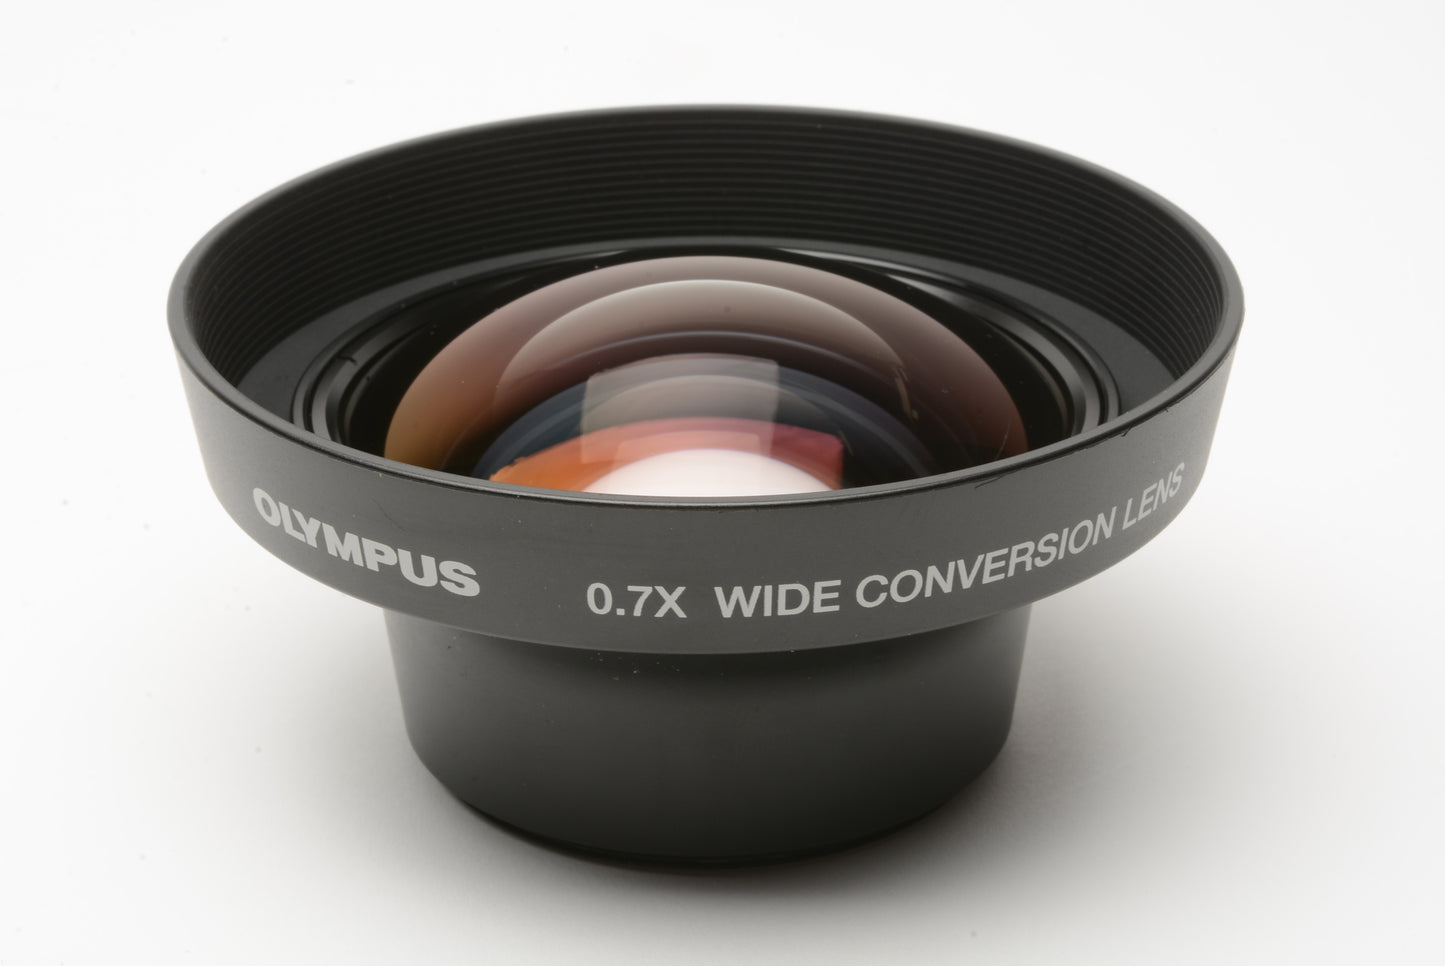 Set of 2 Olympus .7X and 1.7X Conversion lenses, 55mm diameter, caps+pouches+adapter